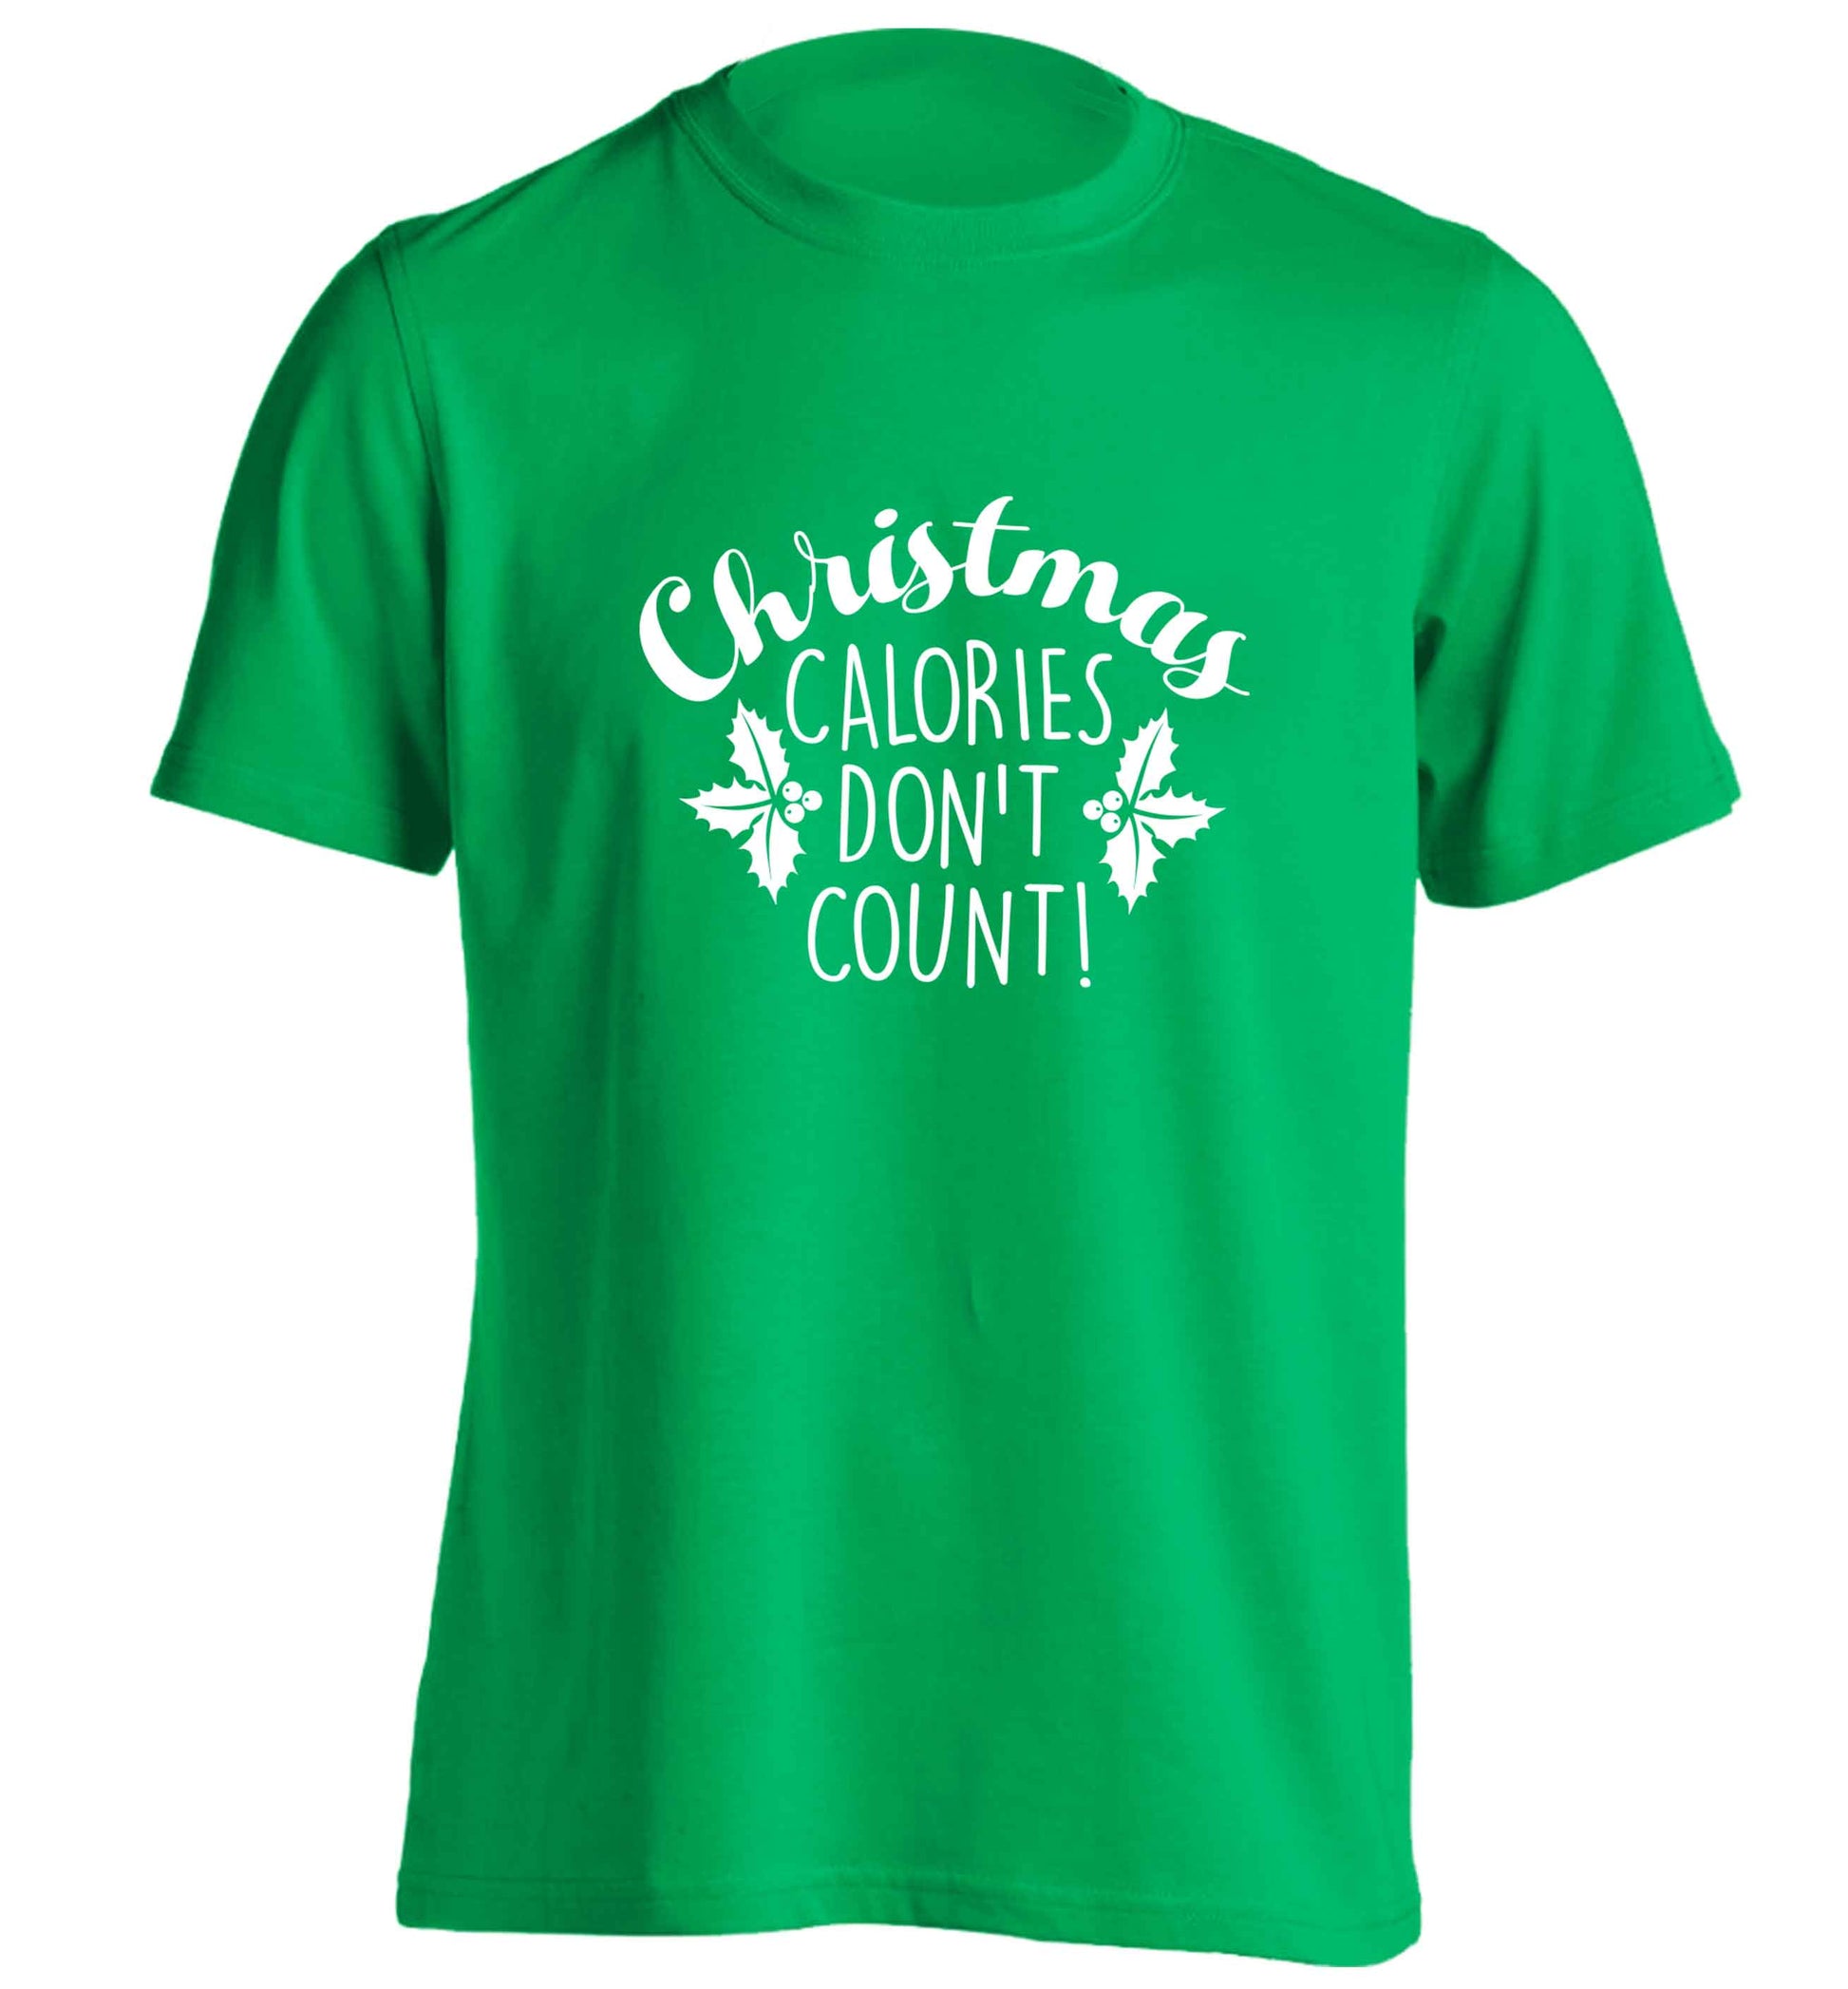 Christmas calories don't count adults unisex green Tshirt 2XL